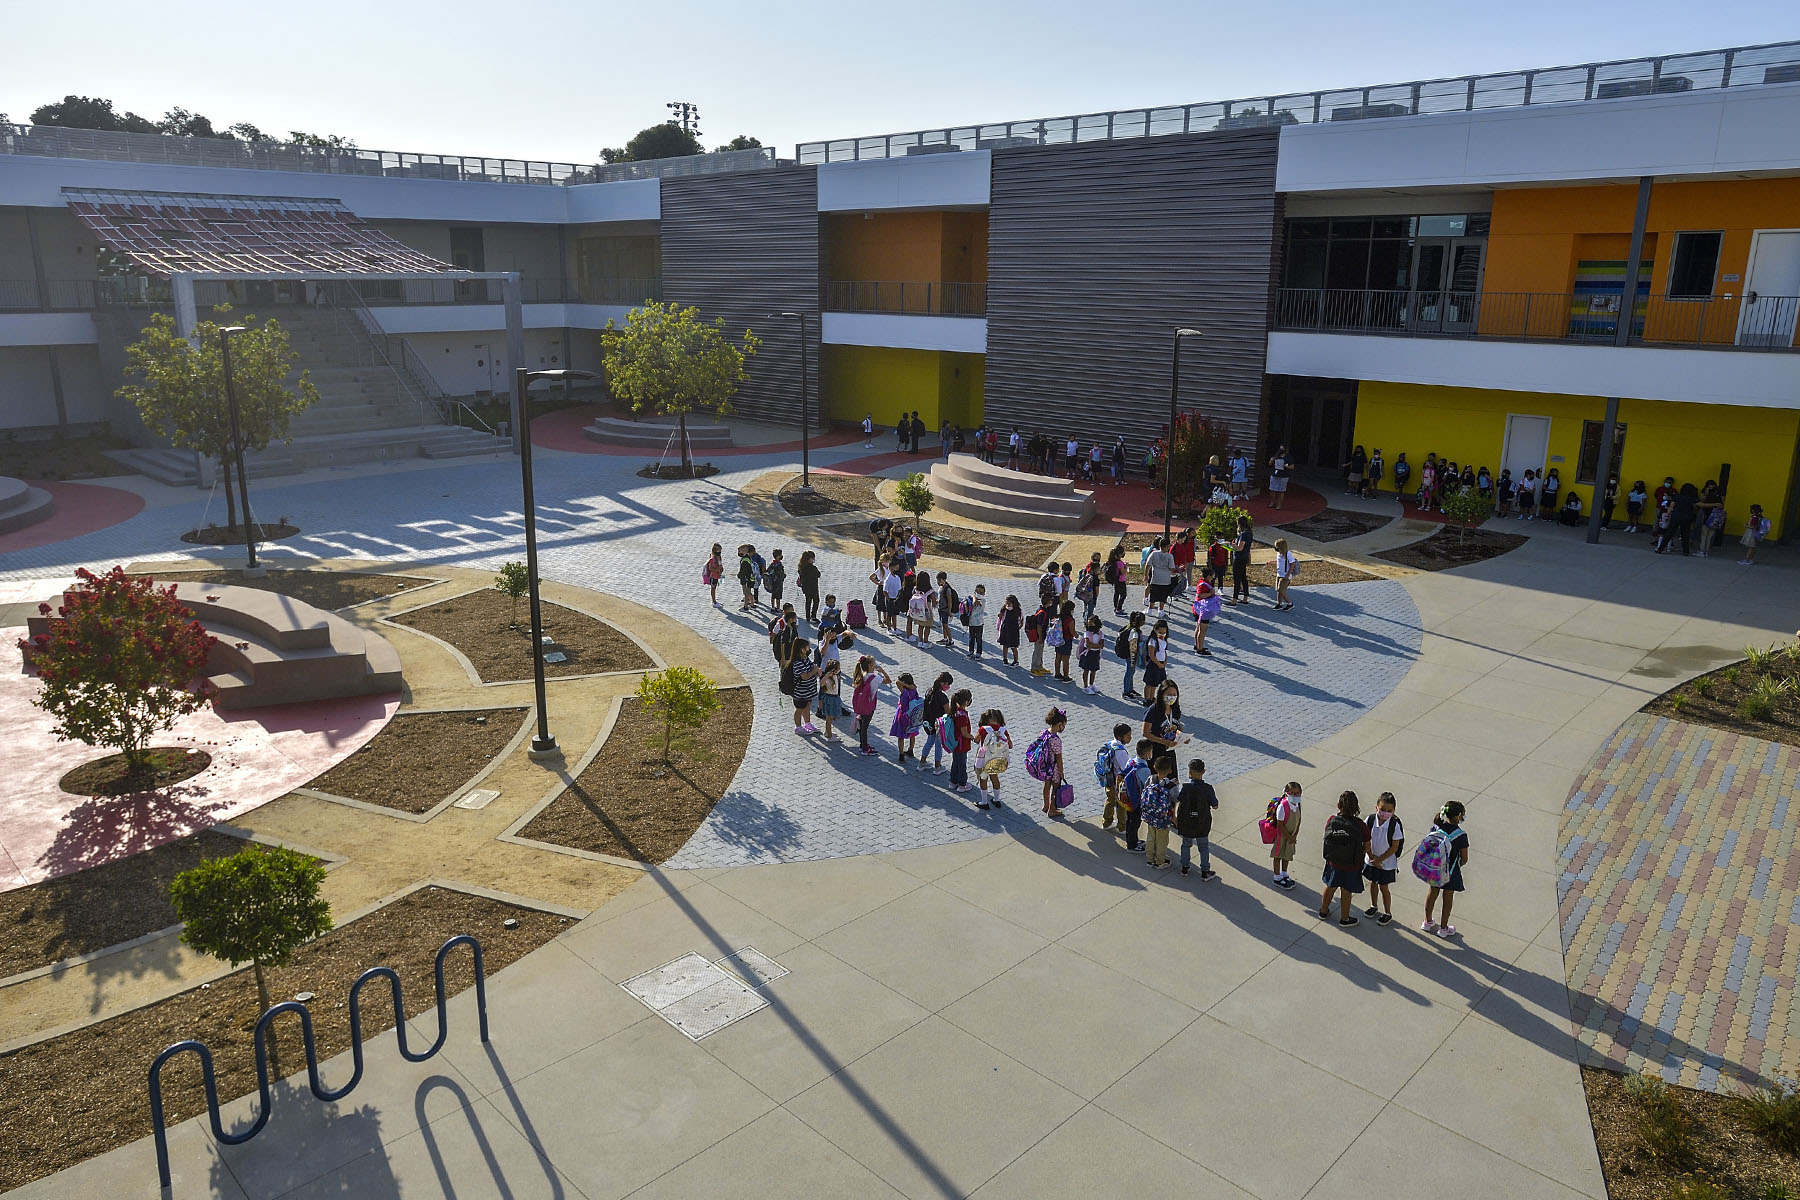 Students line up in the courtyard of Roosevelt Elementary School in Anaheim, California.